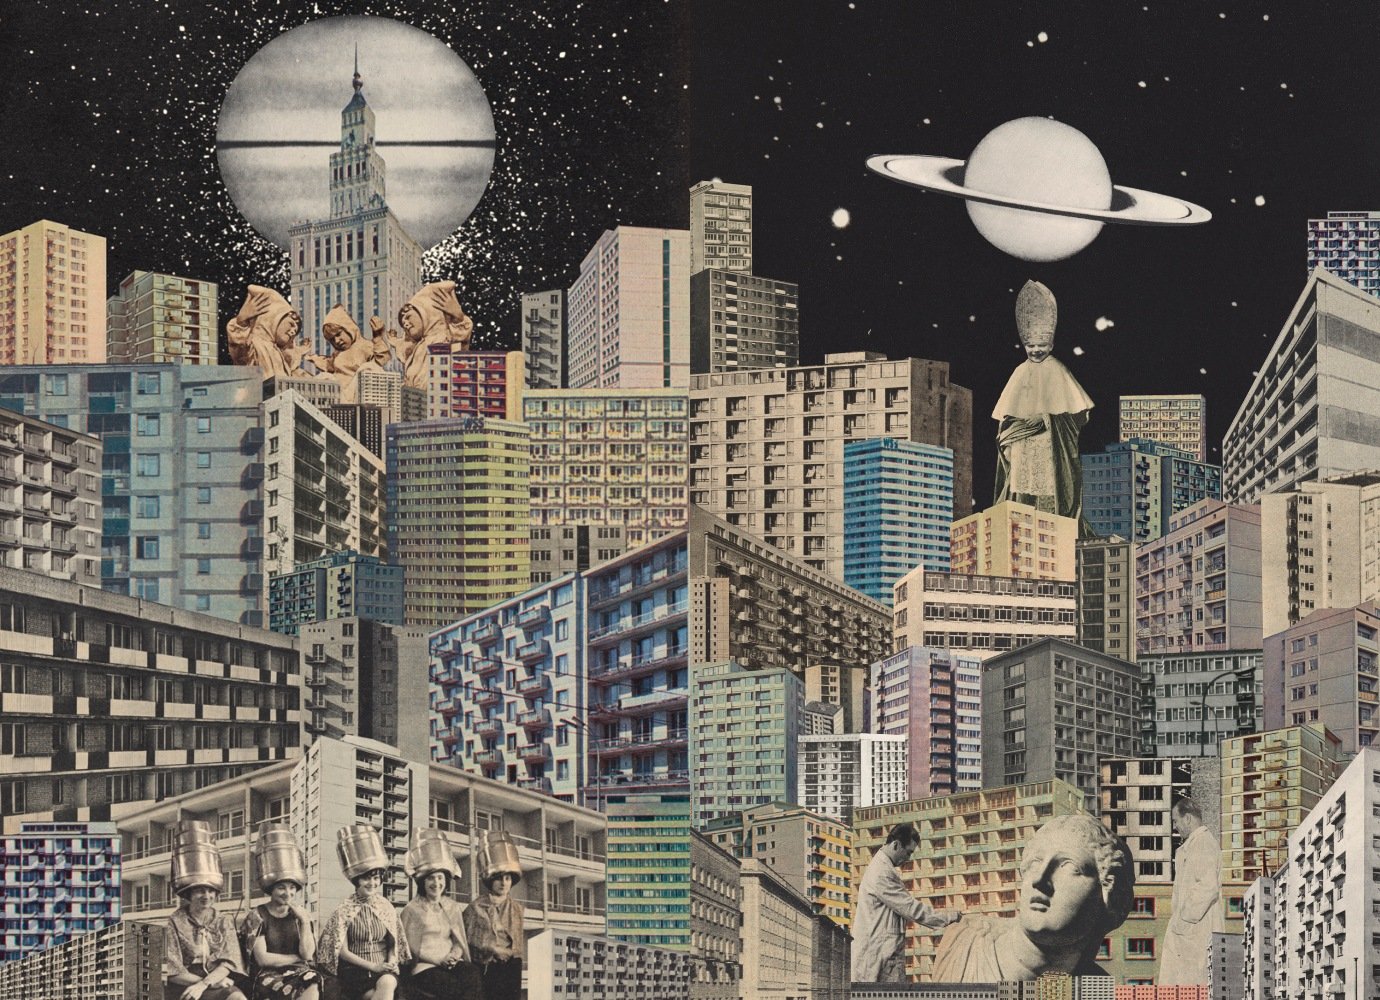 Radical ideas vs concrete realities: enter the surreal urban world of these dystopian collages 